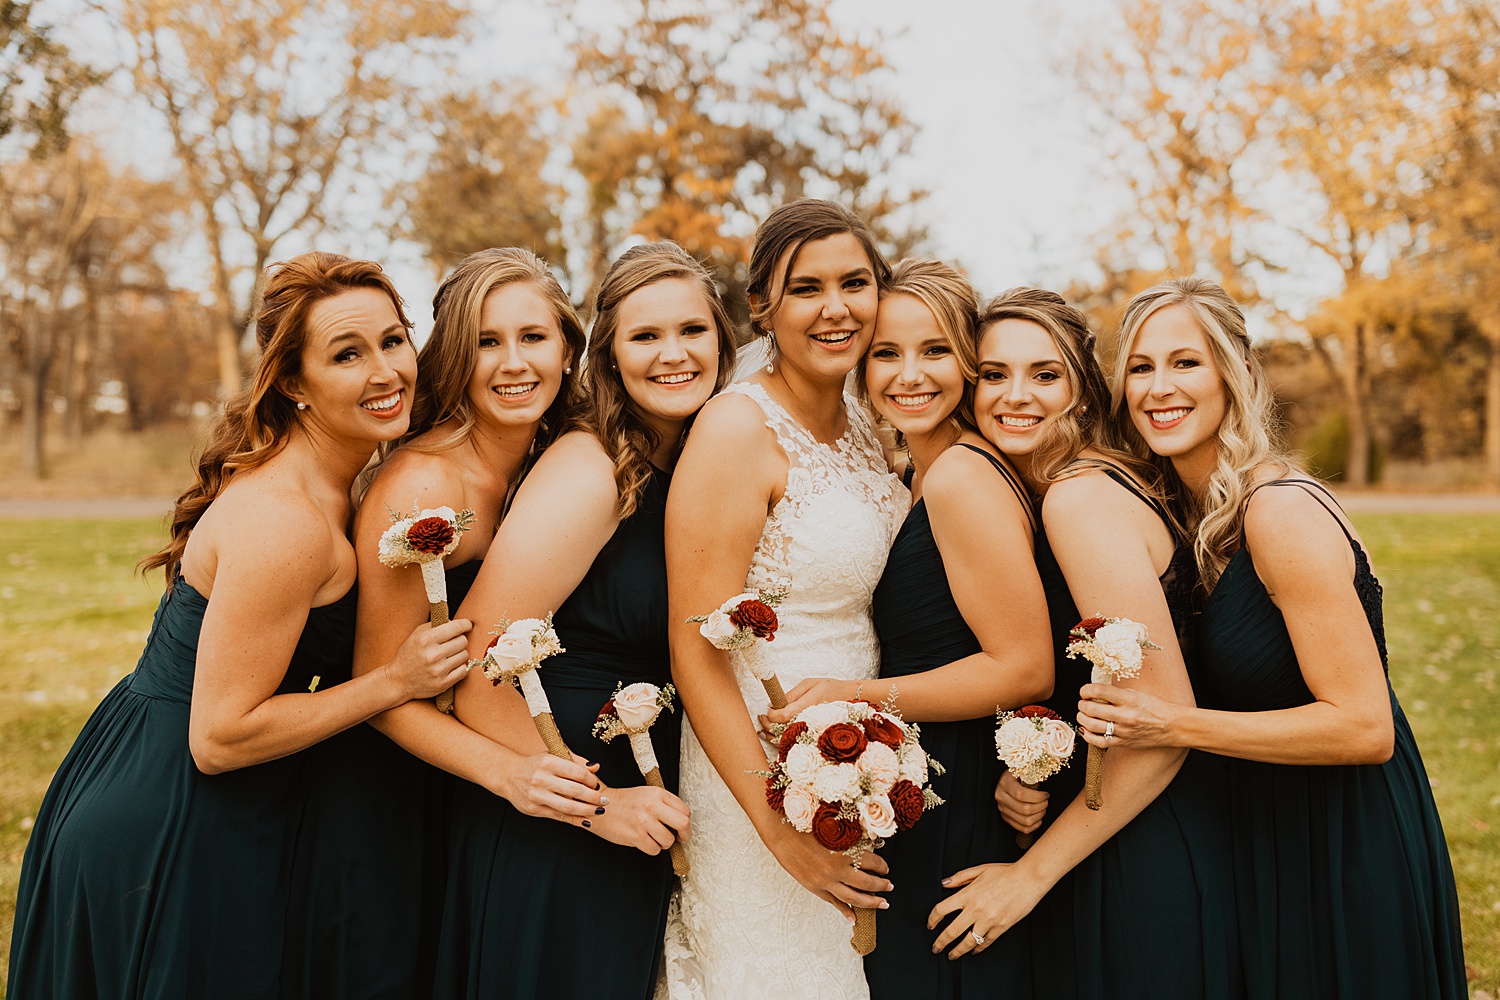 Bridesmaid Dresses | Bridal Party Photos | Bridal Party Colors | Cassie Madden Photography